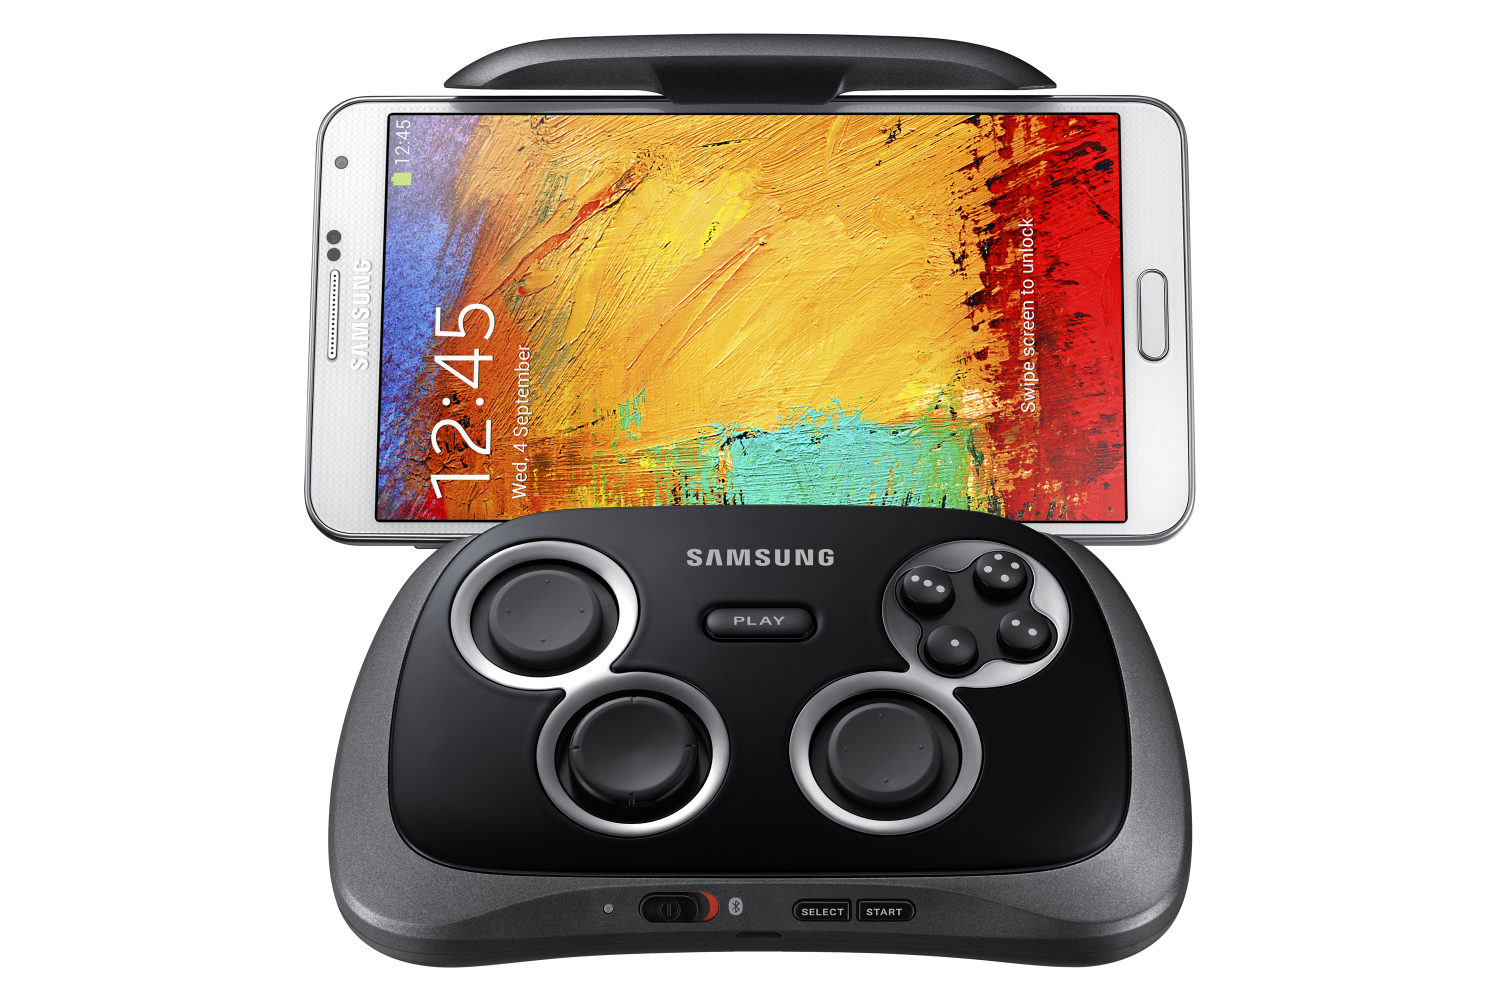 samsung releases smartphone gamepad for your android gaming fingers image 1